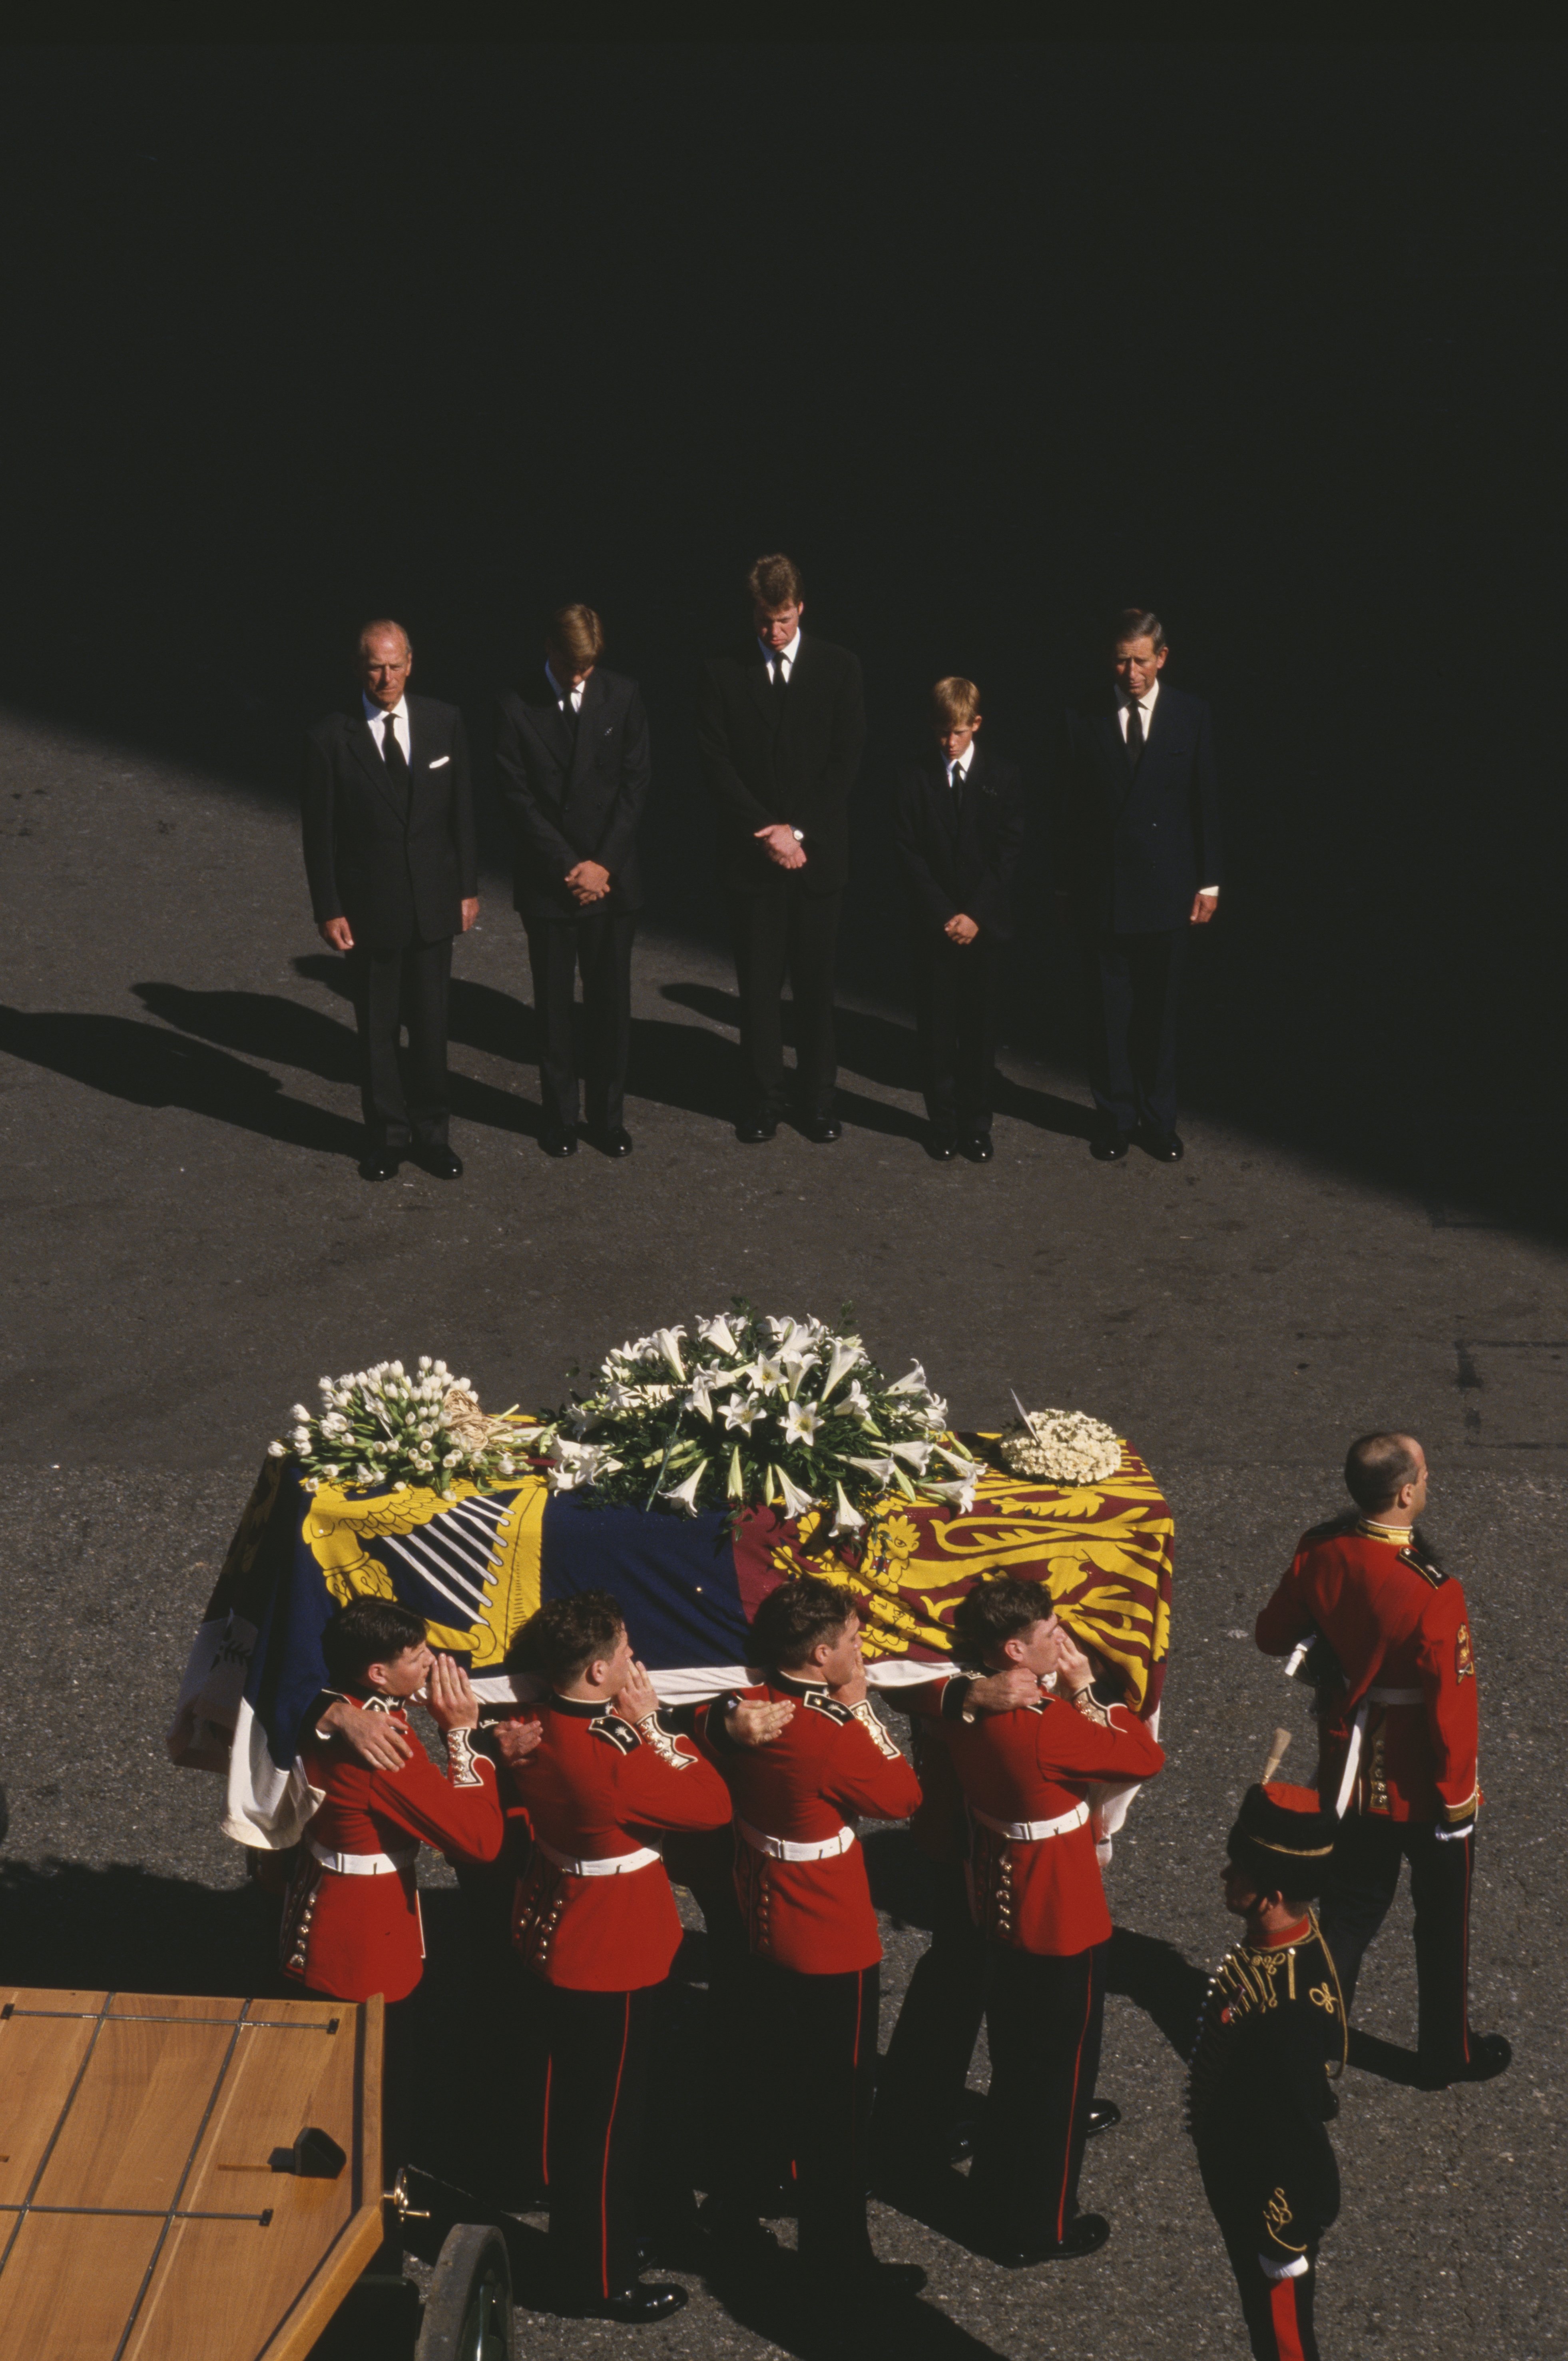 Prince Philip, Prince William, Earl Spencer, Prince Harry and Prince Charles bow their heads behind Princess Diana's casket during the funeral procession of Diana, Princess of Wales on September 6, 1997 in London, England | Source: Getty Images